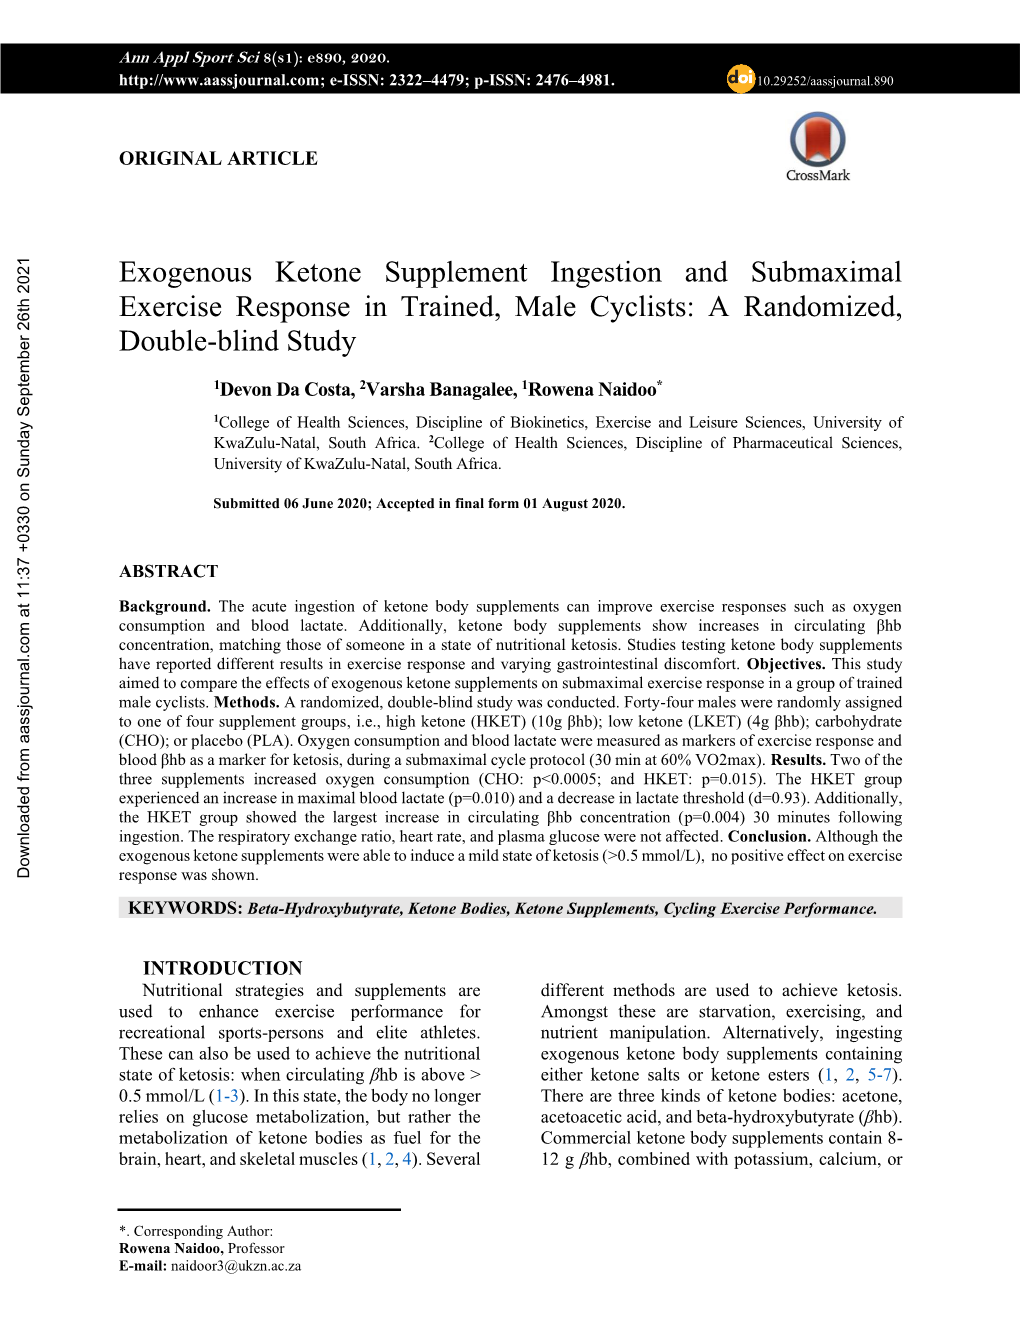 Exogenous Ketone Supplement Ingestion and Submaximal Exercise Response in Trained, Male Cyclists: a Randomized, Double-Blind Study